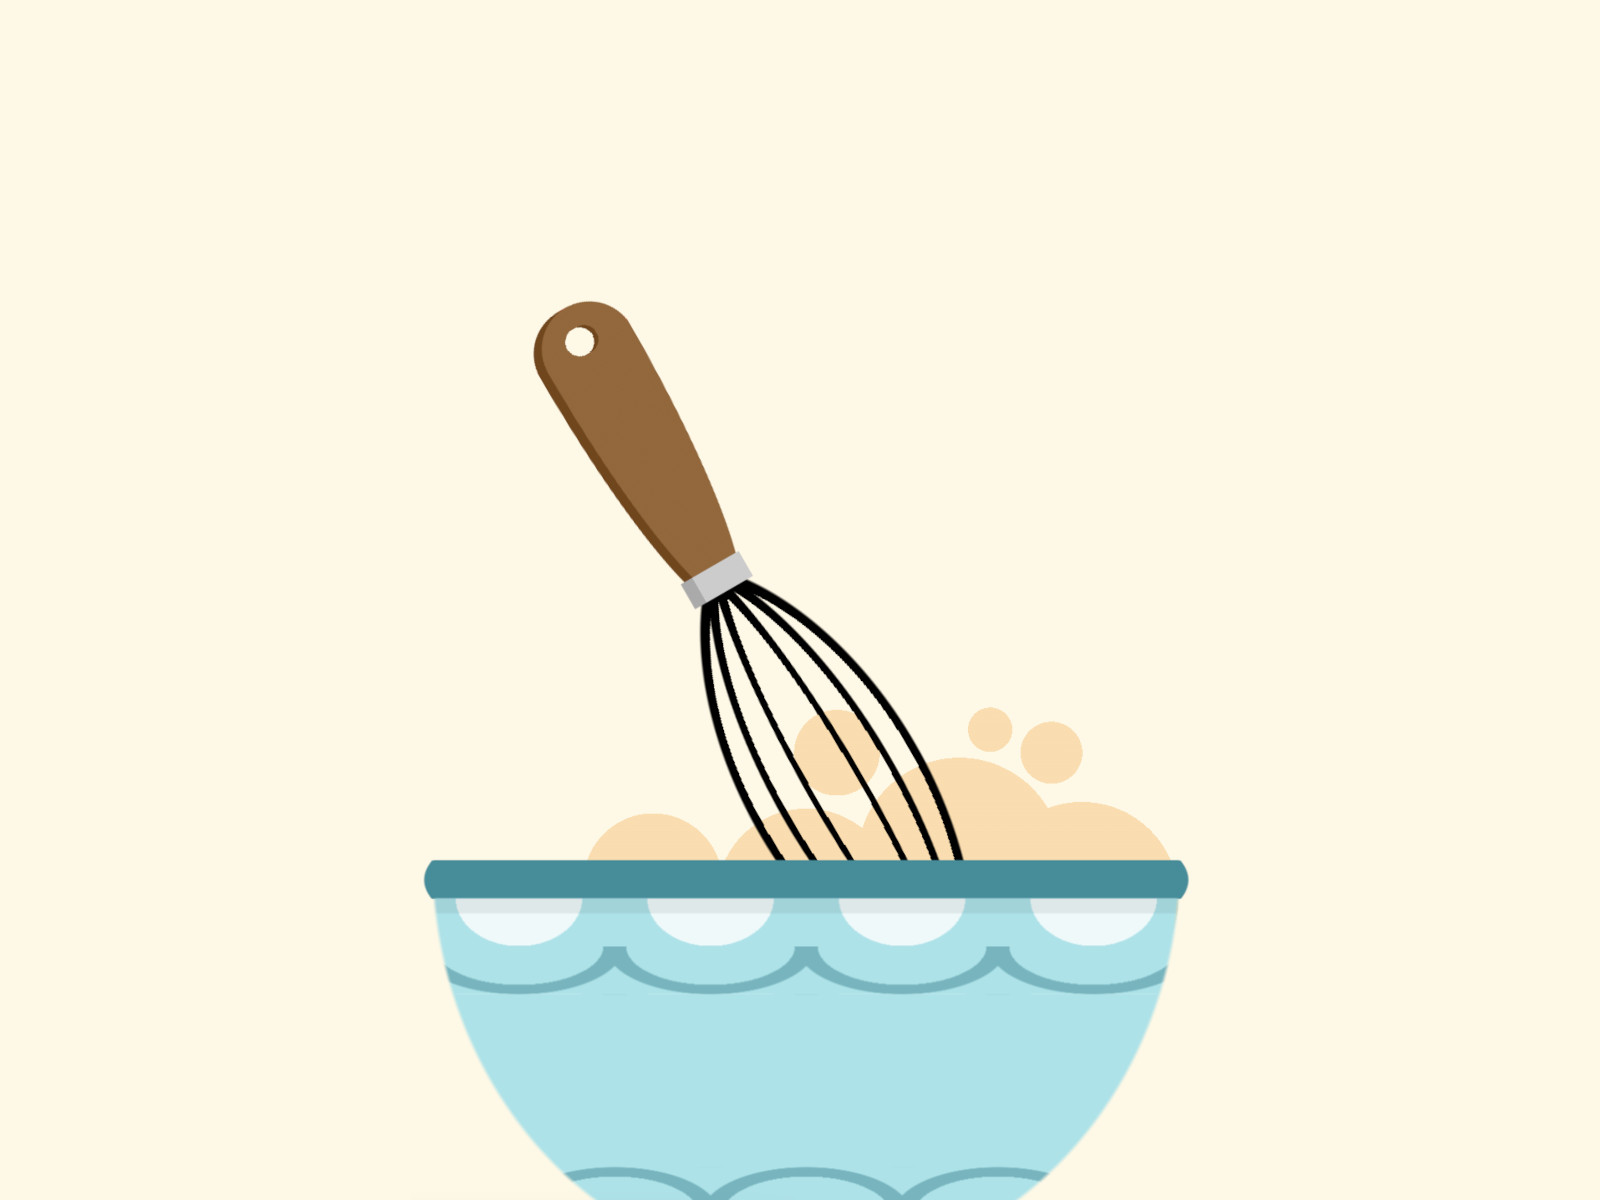 Cartoon of a mixing bowl and a whisk